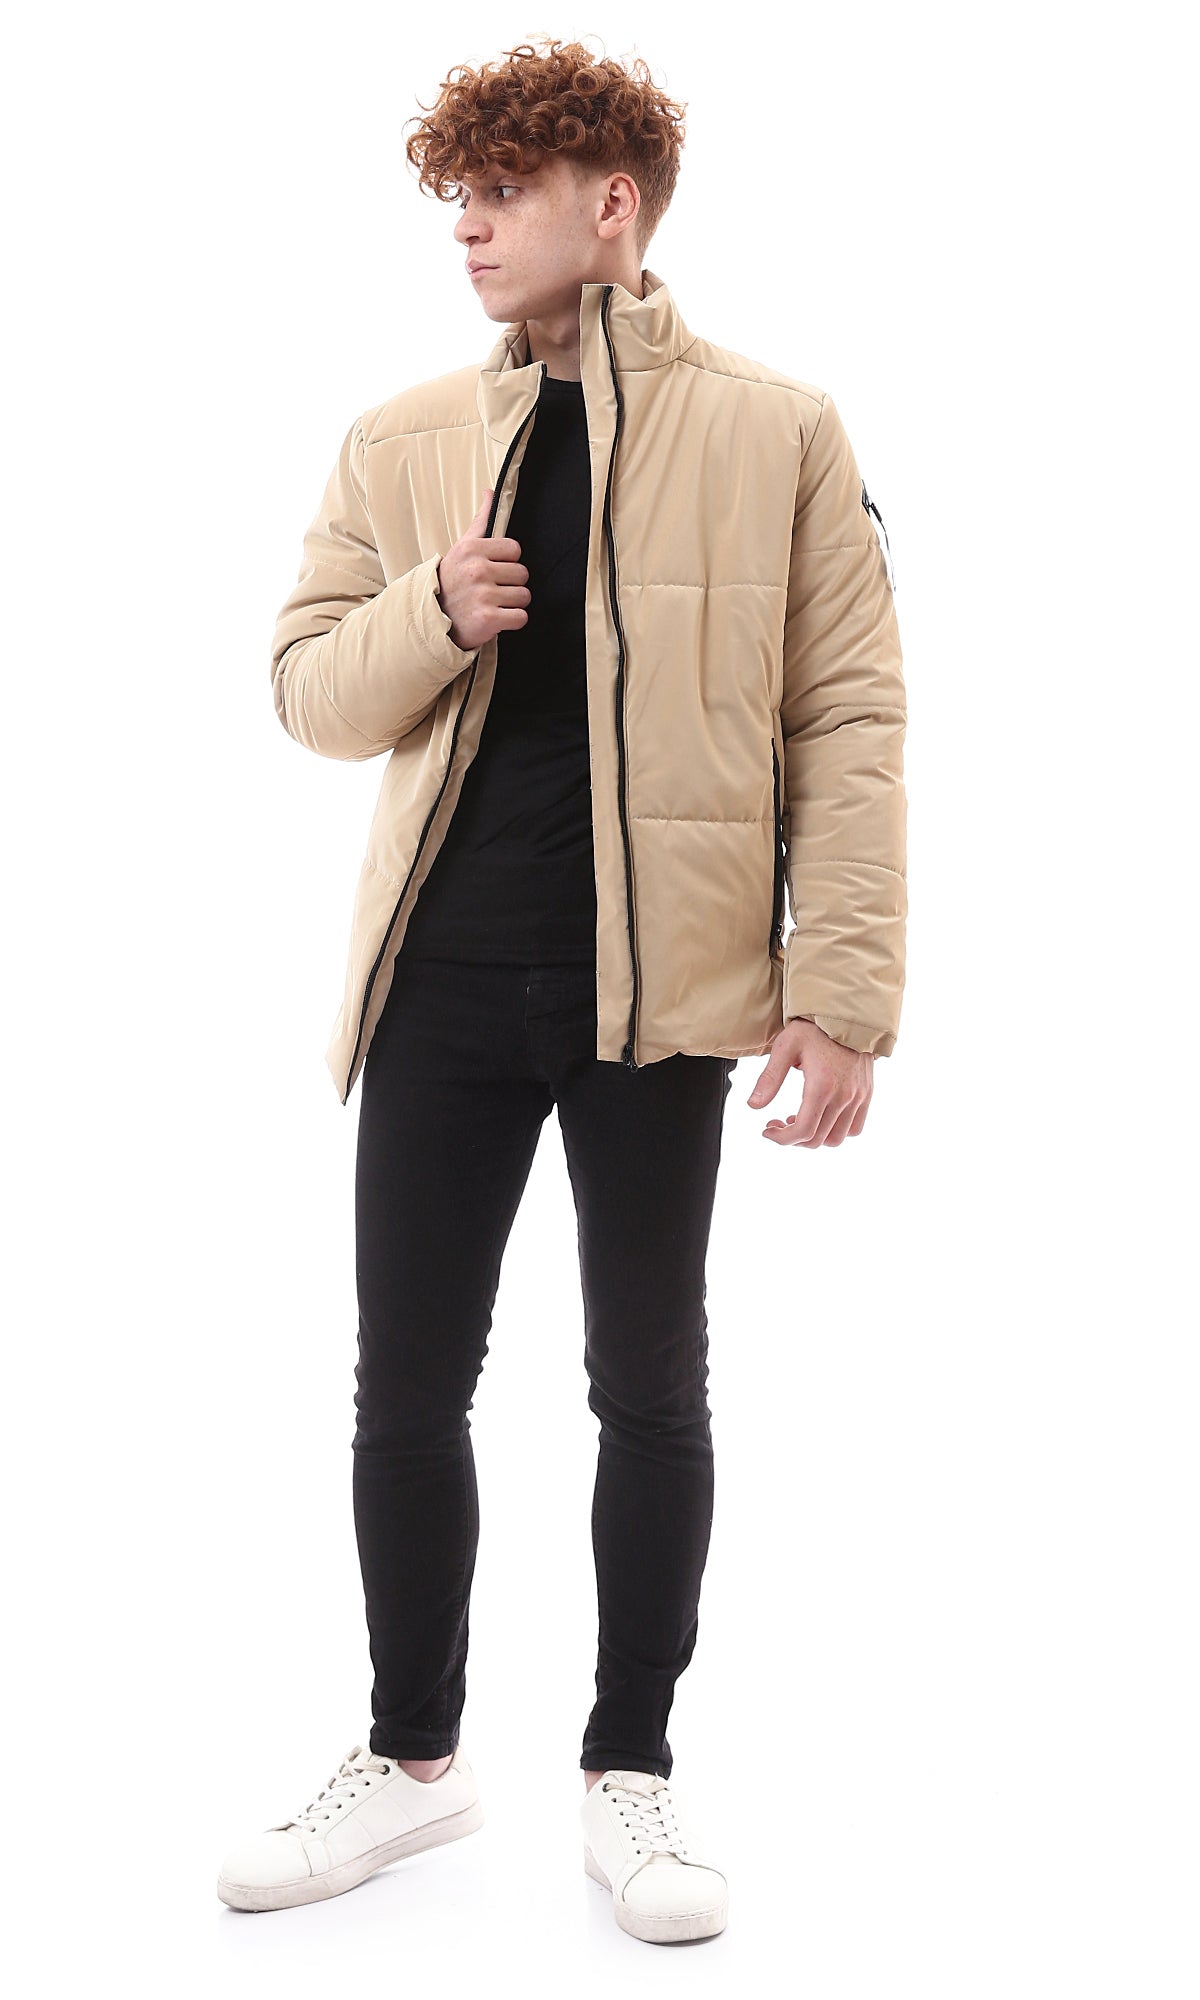 O174074 Stand Collar Long Sleeves Sand Beige Bomber Jacket